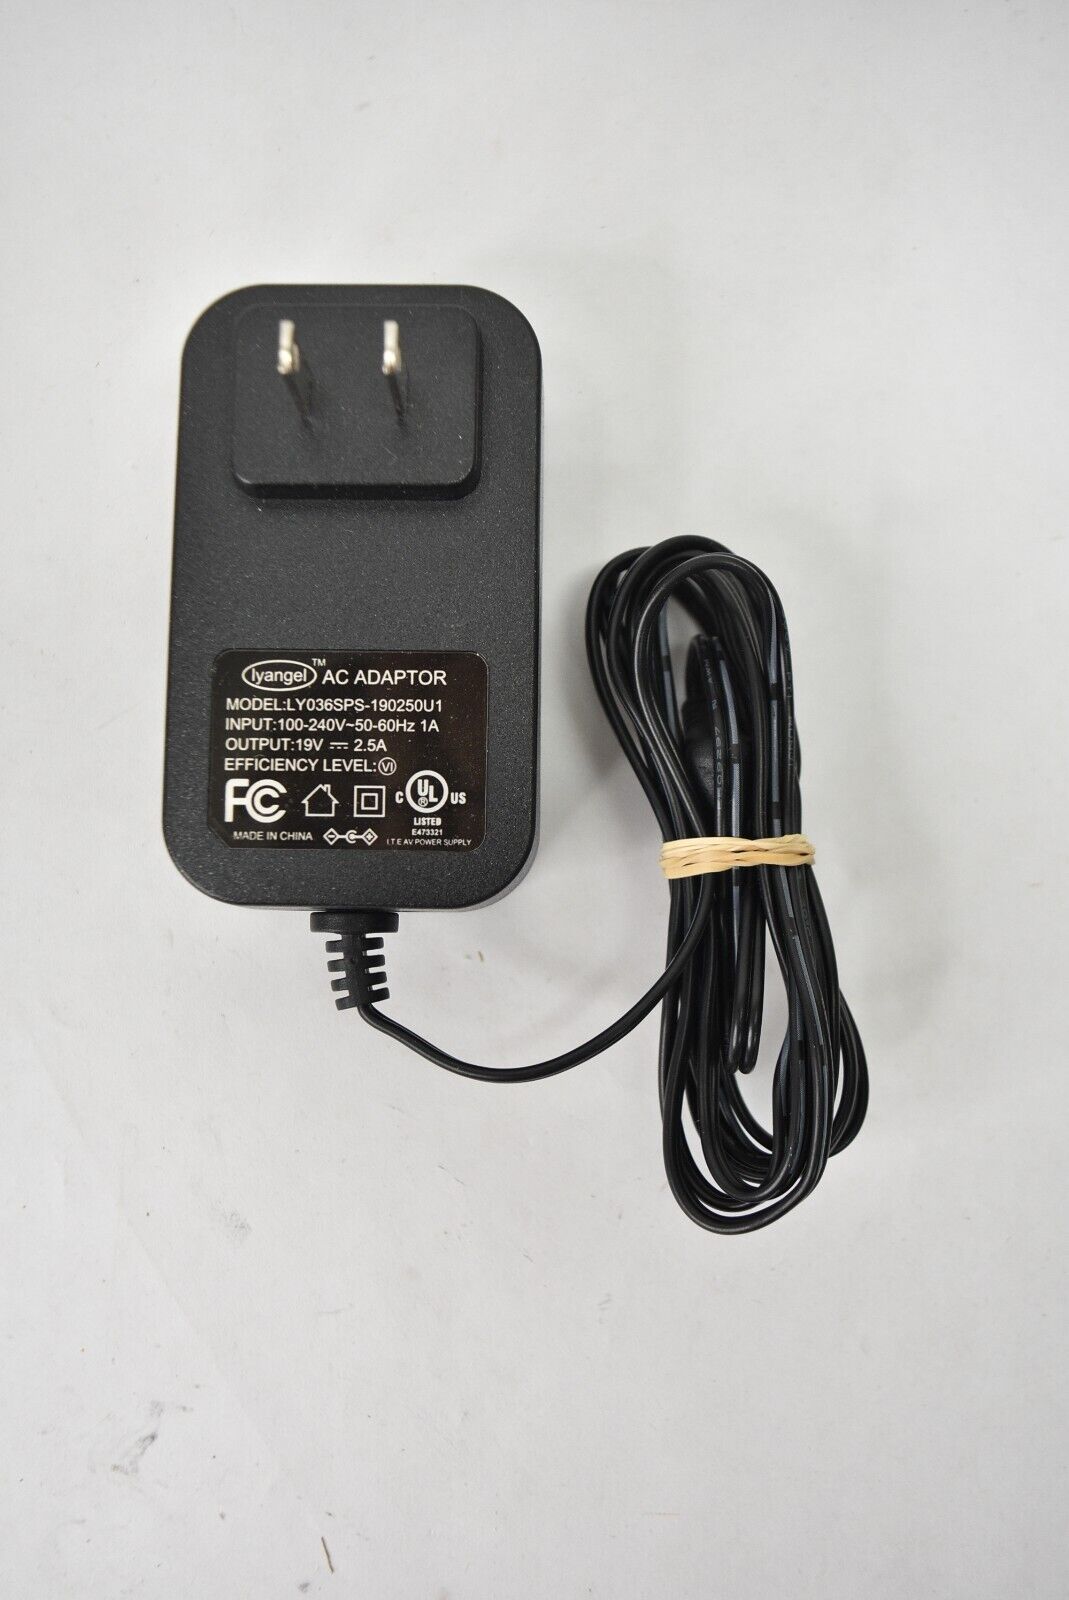 *Brand NEW*Hisense Sero 8 E2281 Android Tablet DC 5V 2A AC/DC Wall Power Charger Adapter Cord